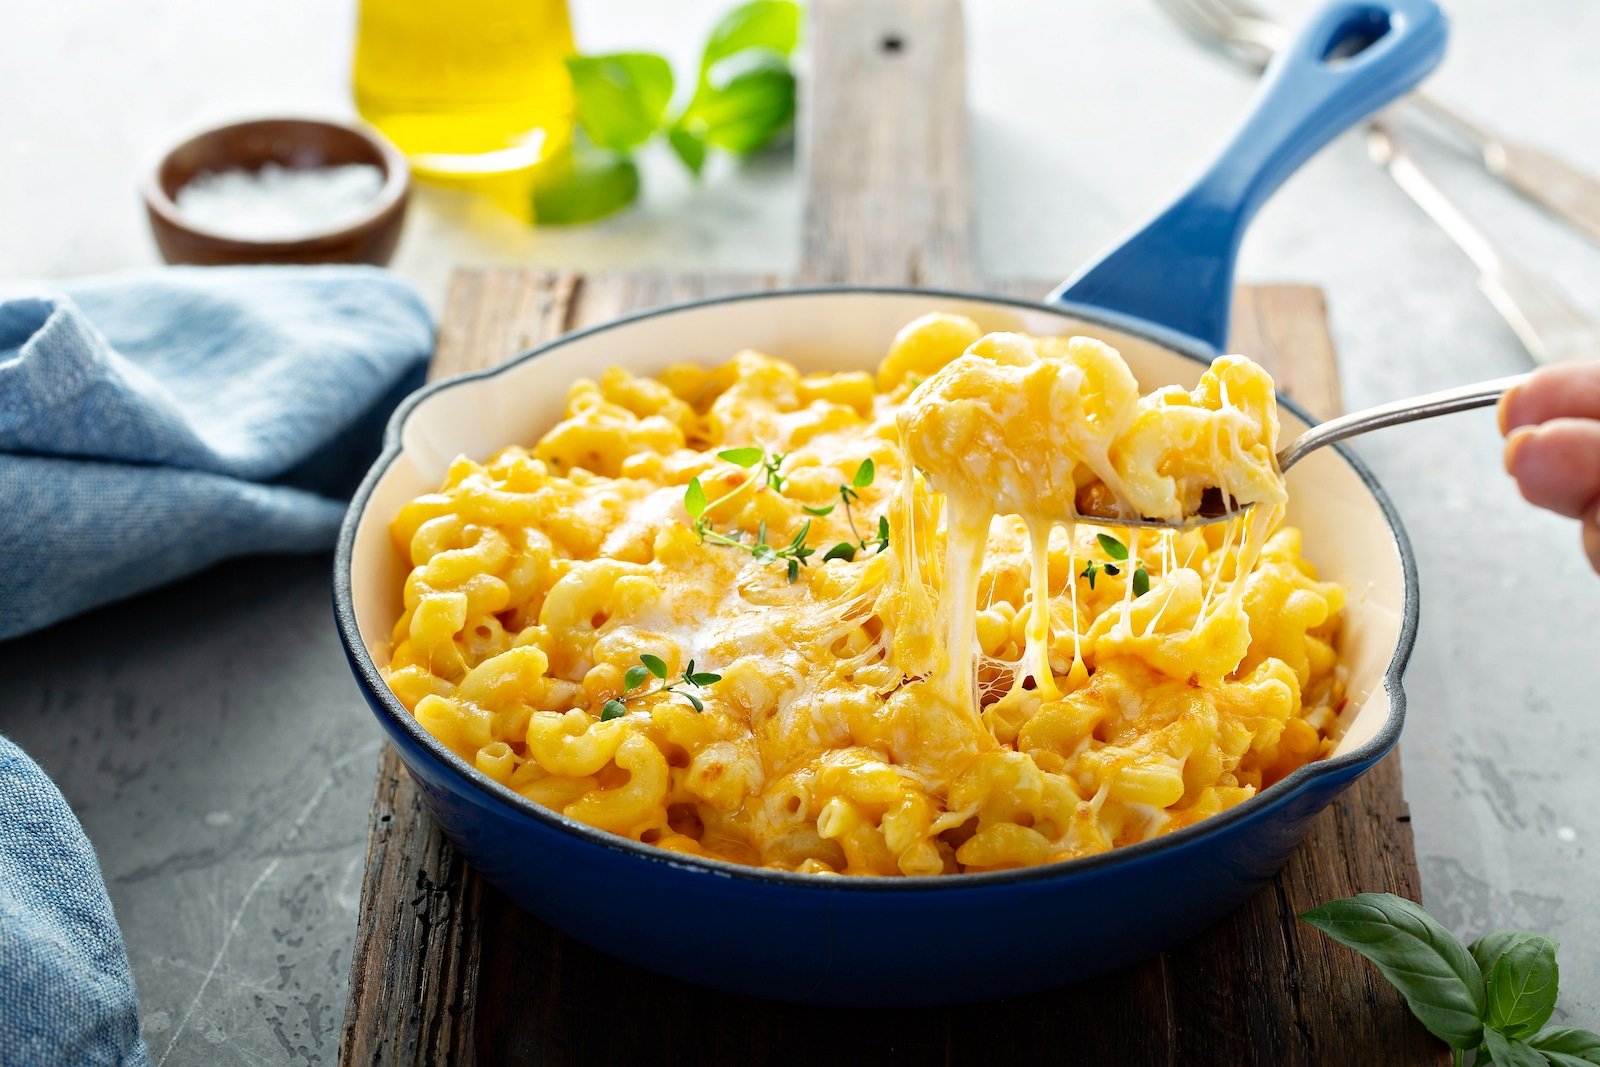 Image Credit: Shutterstock /Elena Veselova <p><span>The bright orange color of many boxed mac and cheese products comes from artificial dyes, which some studies suggest may affect children’s behavior.</span></p>